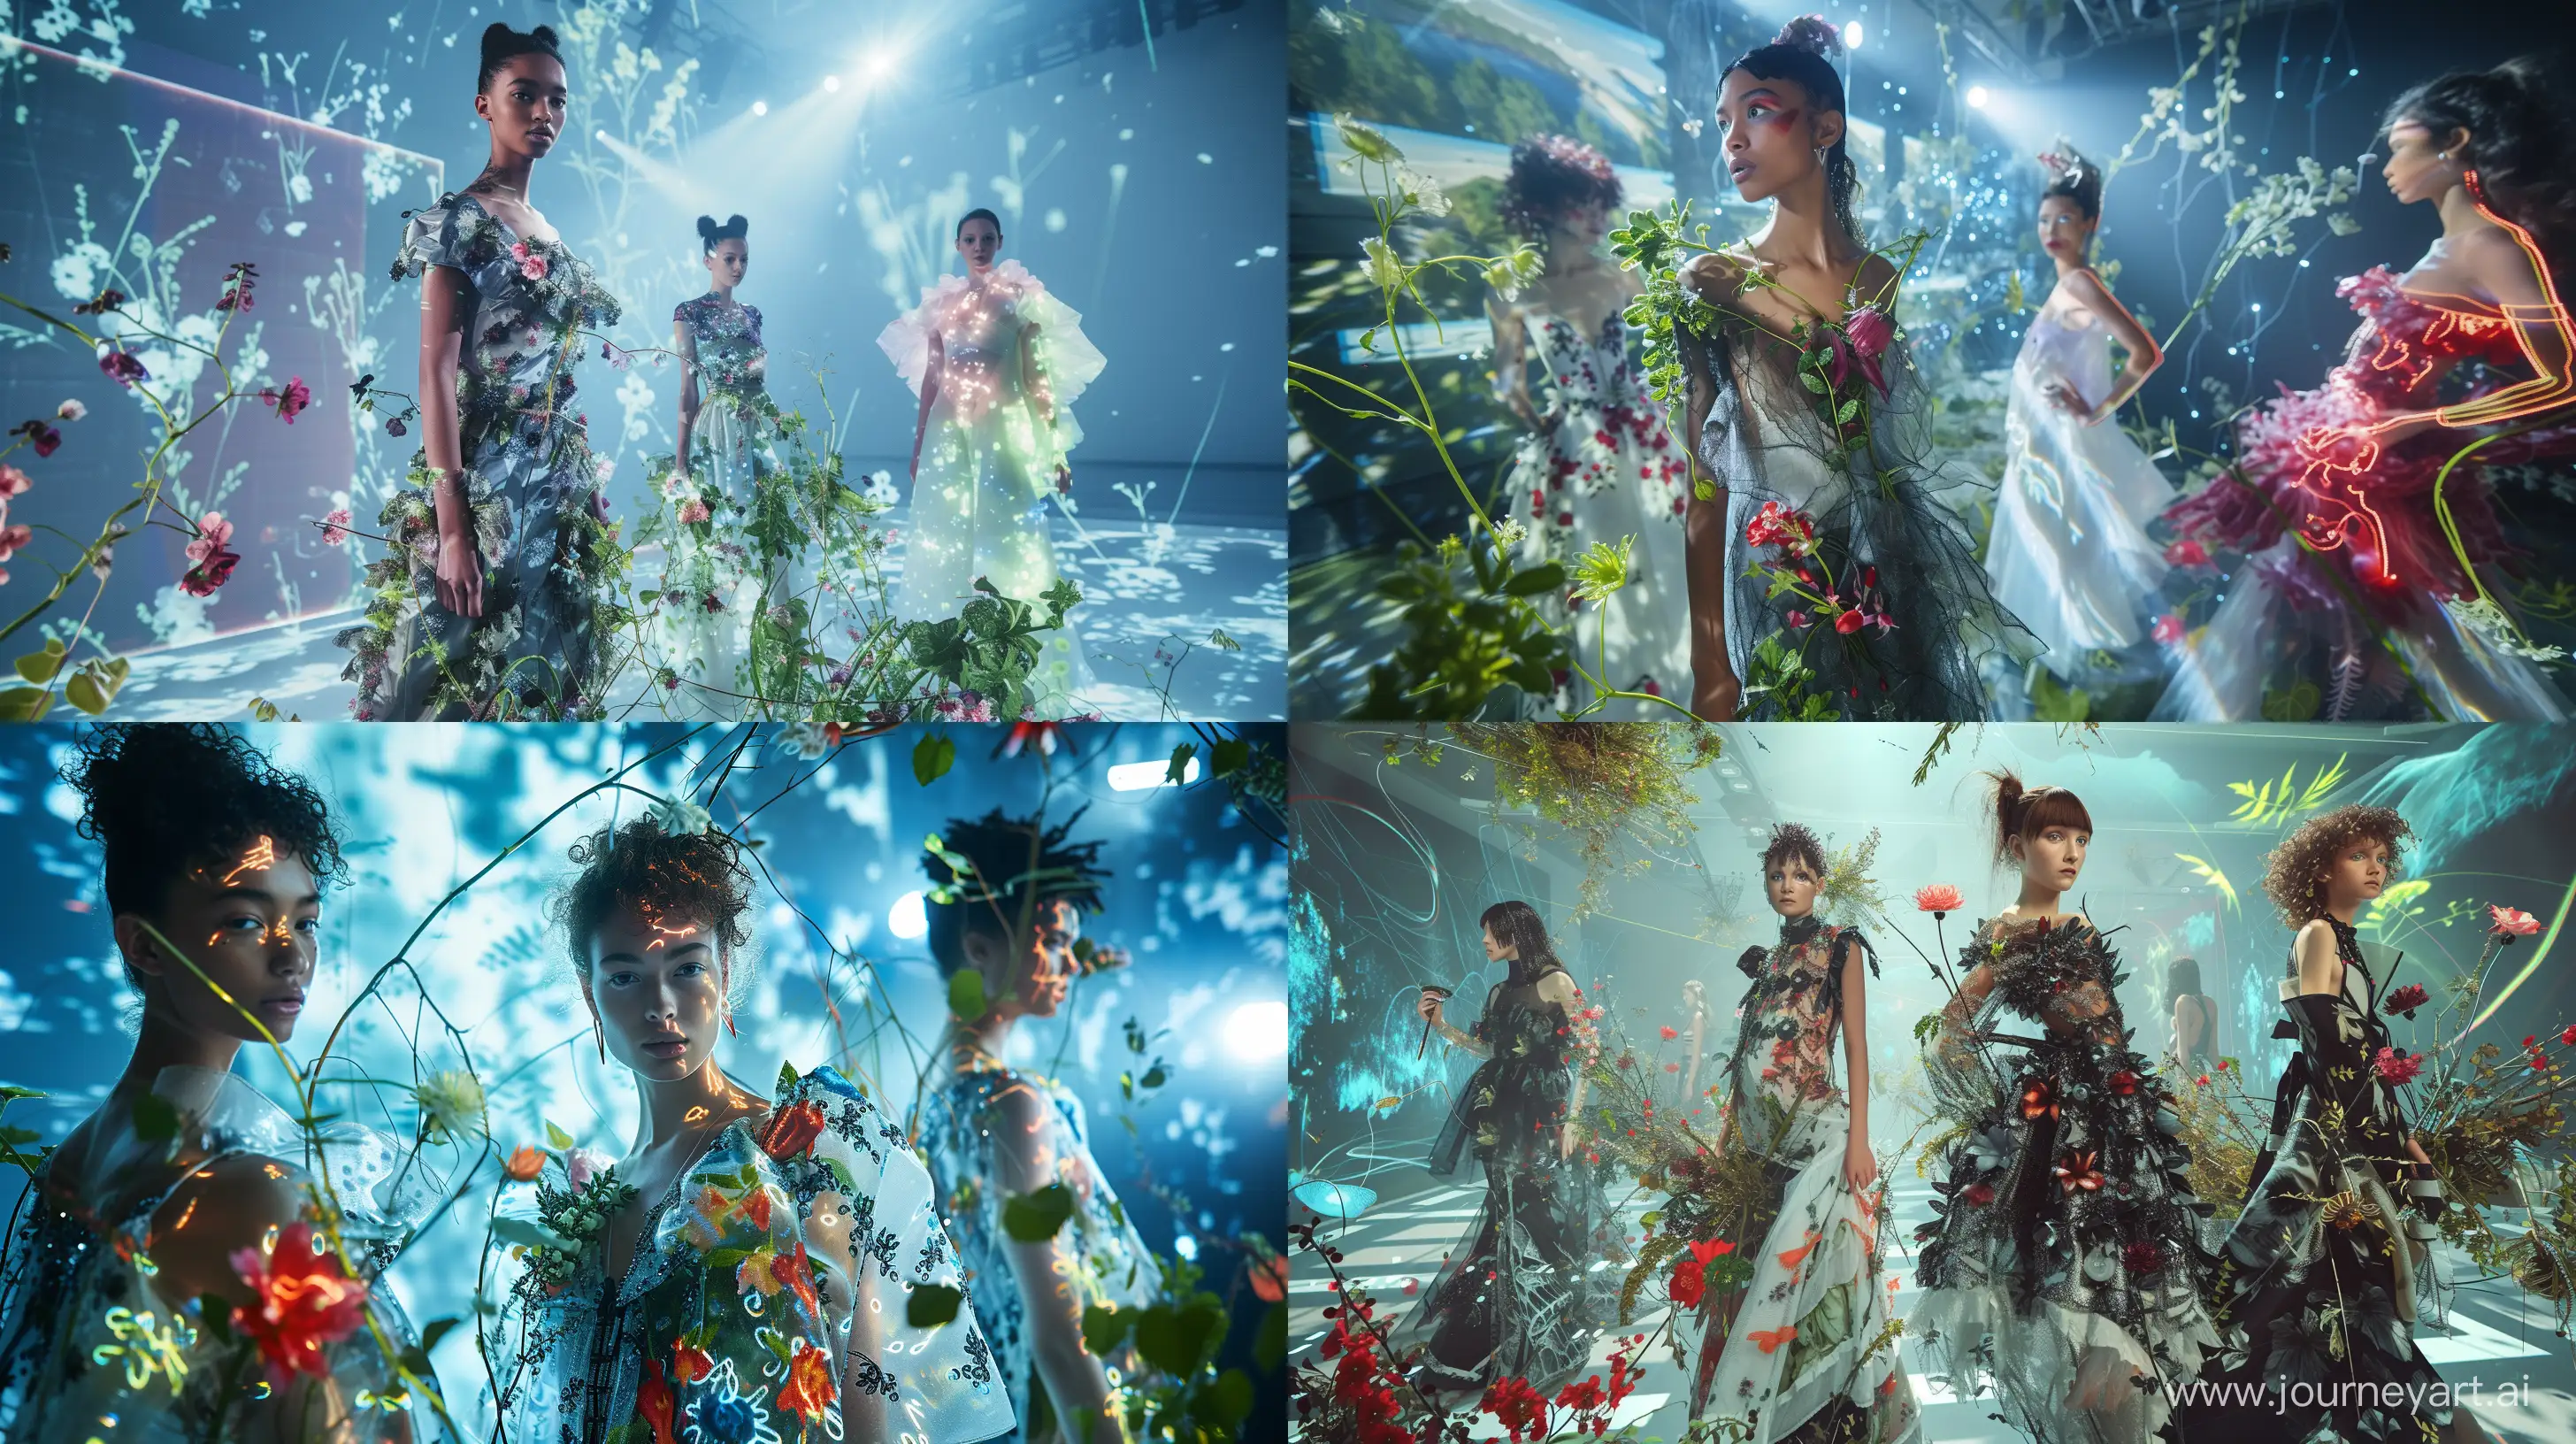 Beautiful online models posing on a futuristic runway, wearing avant-garde fashion pieces that incorporate organic elements like flowers and vines, surrounded by holographic projections of nature, Photography, high-resolution digital camera with a 50mm lens, capturing the intricate details of the clothing and the models, --ar 16:9